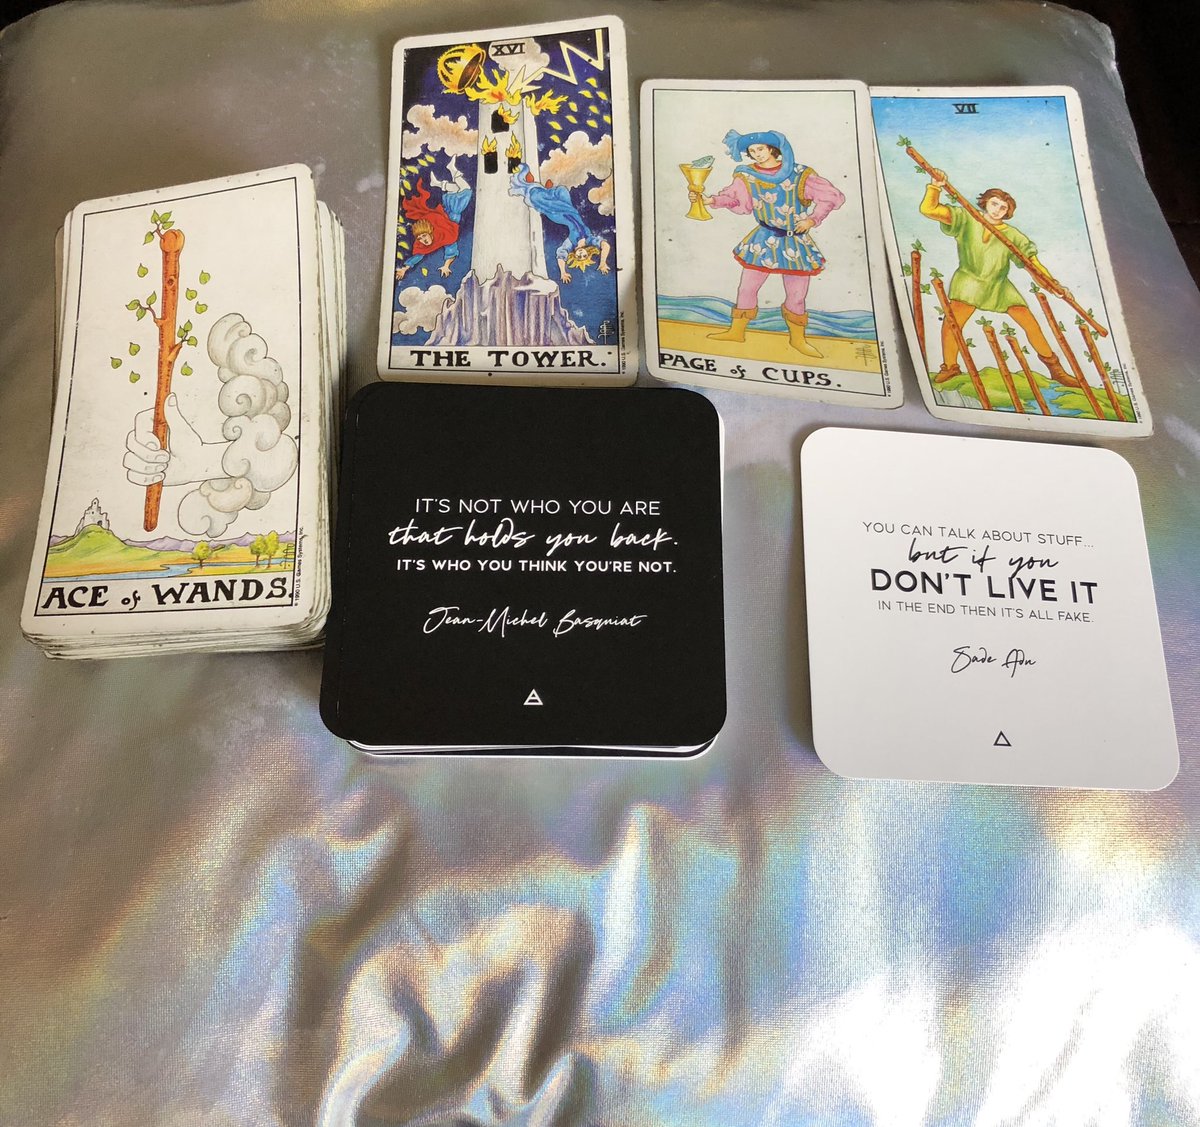 4/8/20 stand up and claim what’s rightfully yours (no matter what it may be). you’re too focused on the end result & you’re not enjoying the process. growth never came from comfort zones. take note of what habits you need to change. speak up for what you want & take initiative.